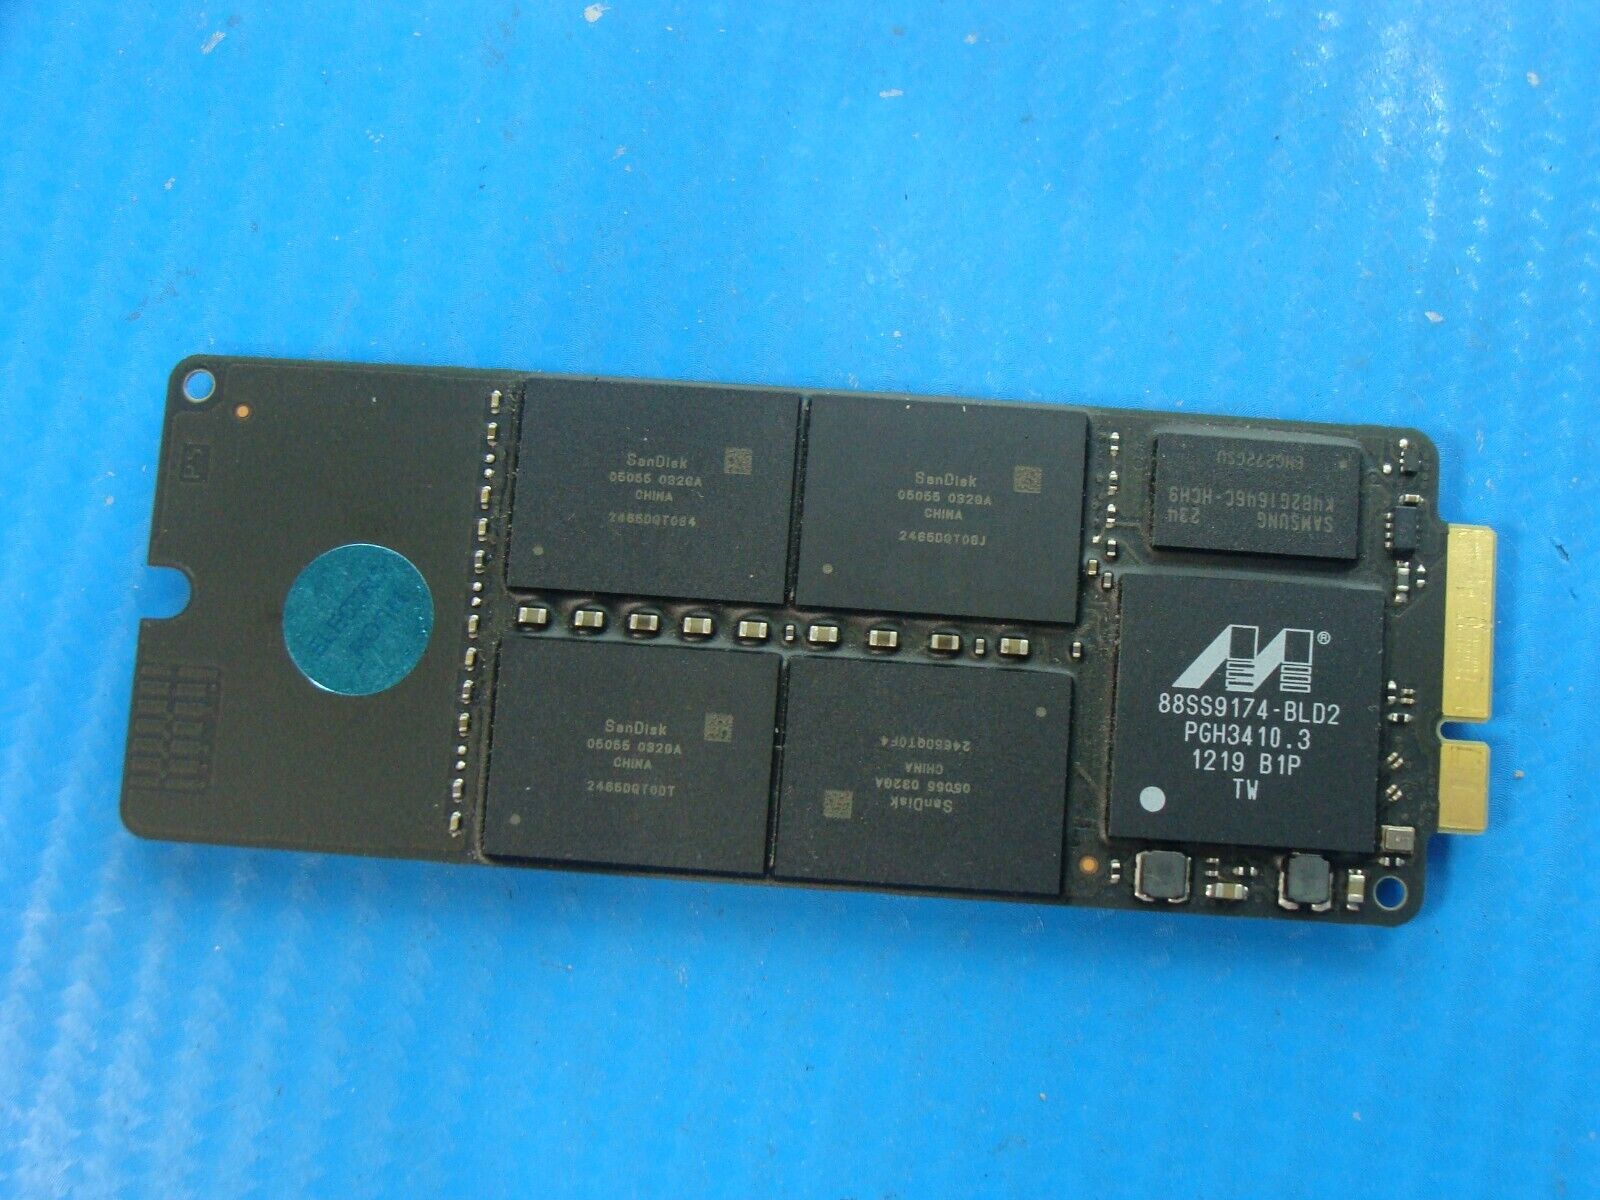 MacBook Pro A1425 SanDisk 256GB SSD Solid State Drive 54-50-03974-06 661-7284